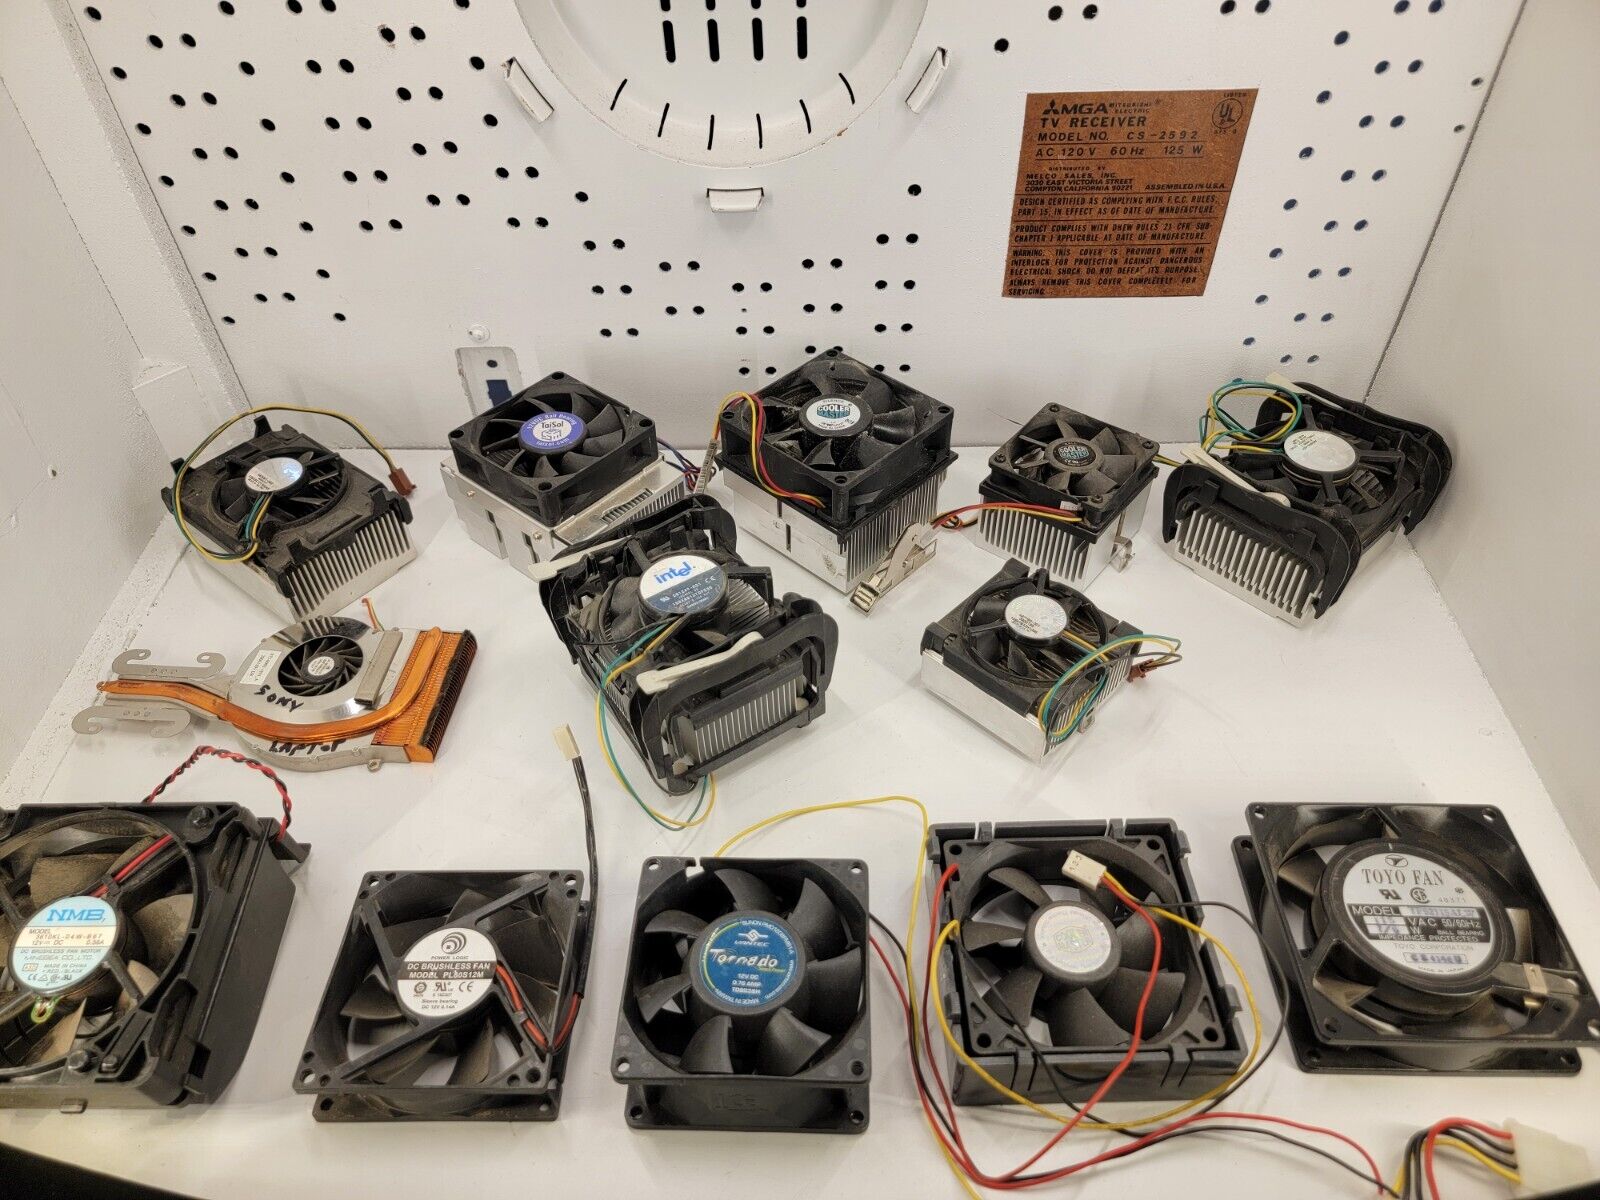 LOT Of 13 VINTAGE CPU FANS & HEAT SINKS Intel Sony TaiSol Cooler Master Toyo NMB